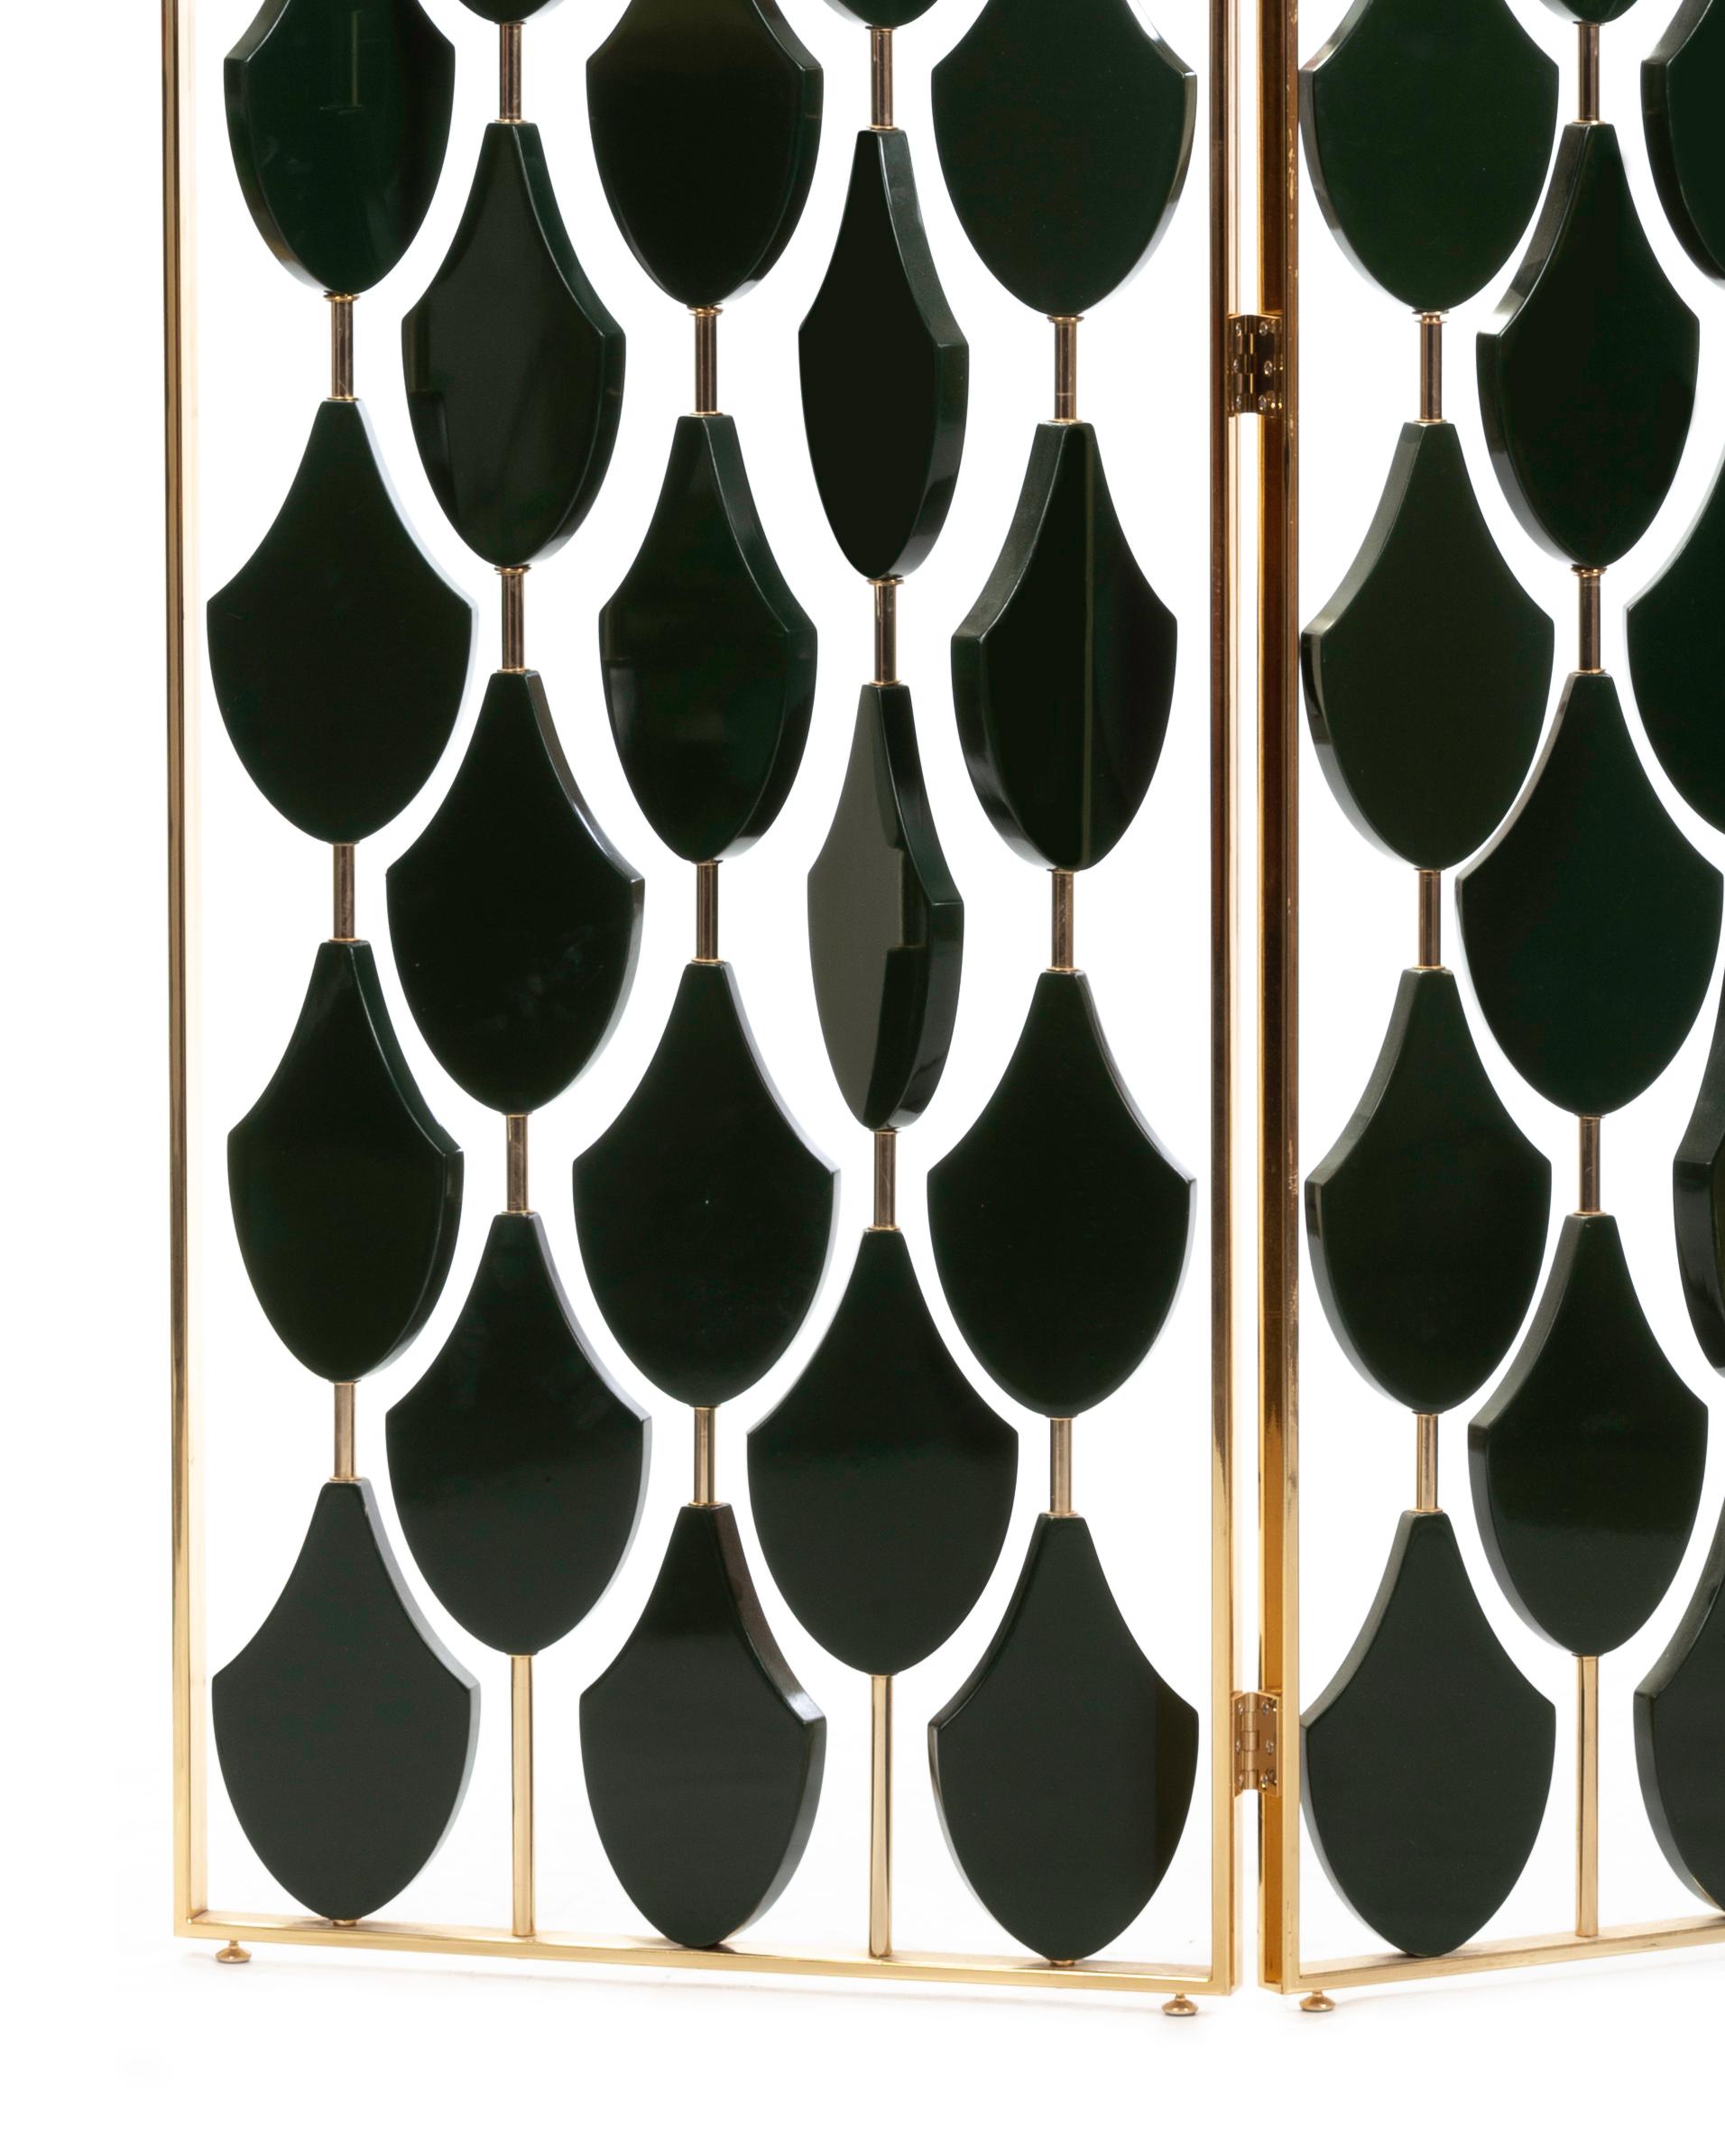 Inspired by Art Deco atmospheres, the Siren screen enchants with its sinuous shapes. The green lacquered wooden elements are inspired by the skin of a sea creature, a mermaid that will enhance your home. 

Features:
Room divider with a 24 ct